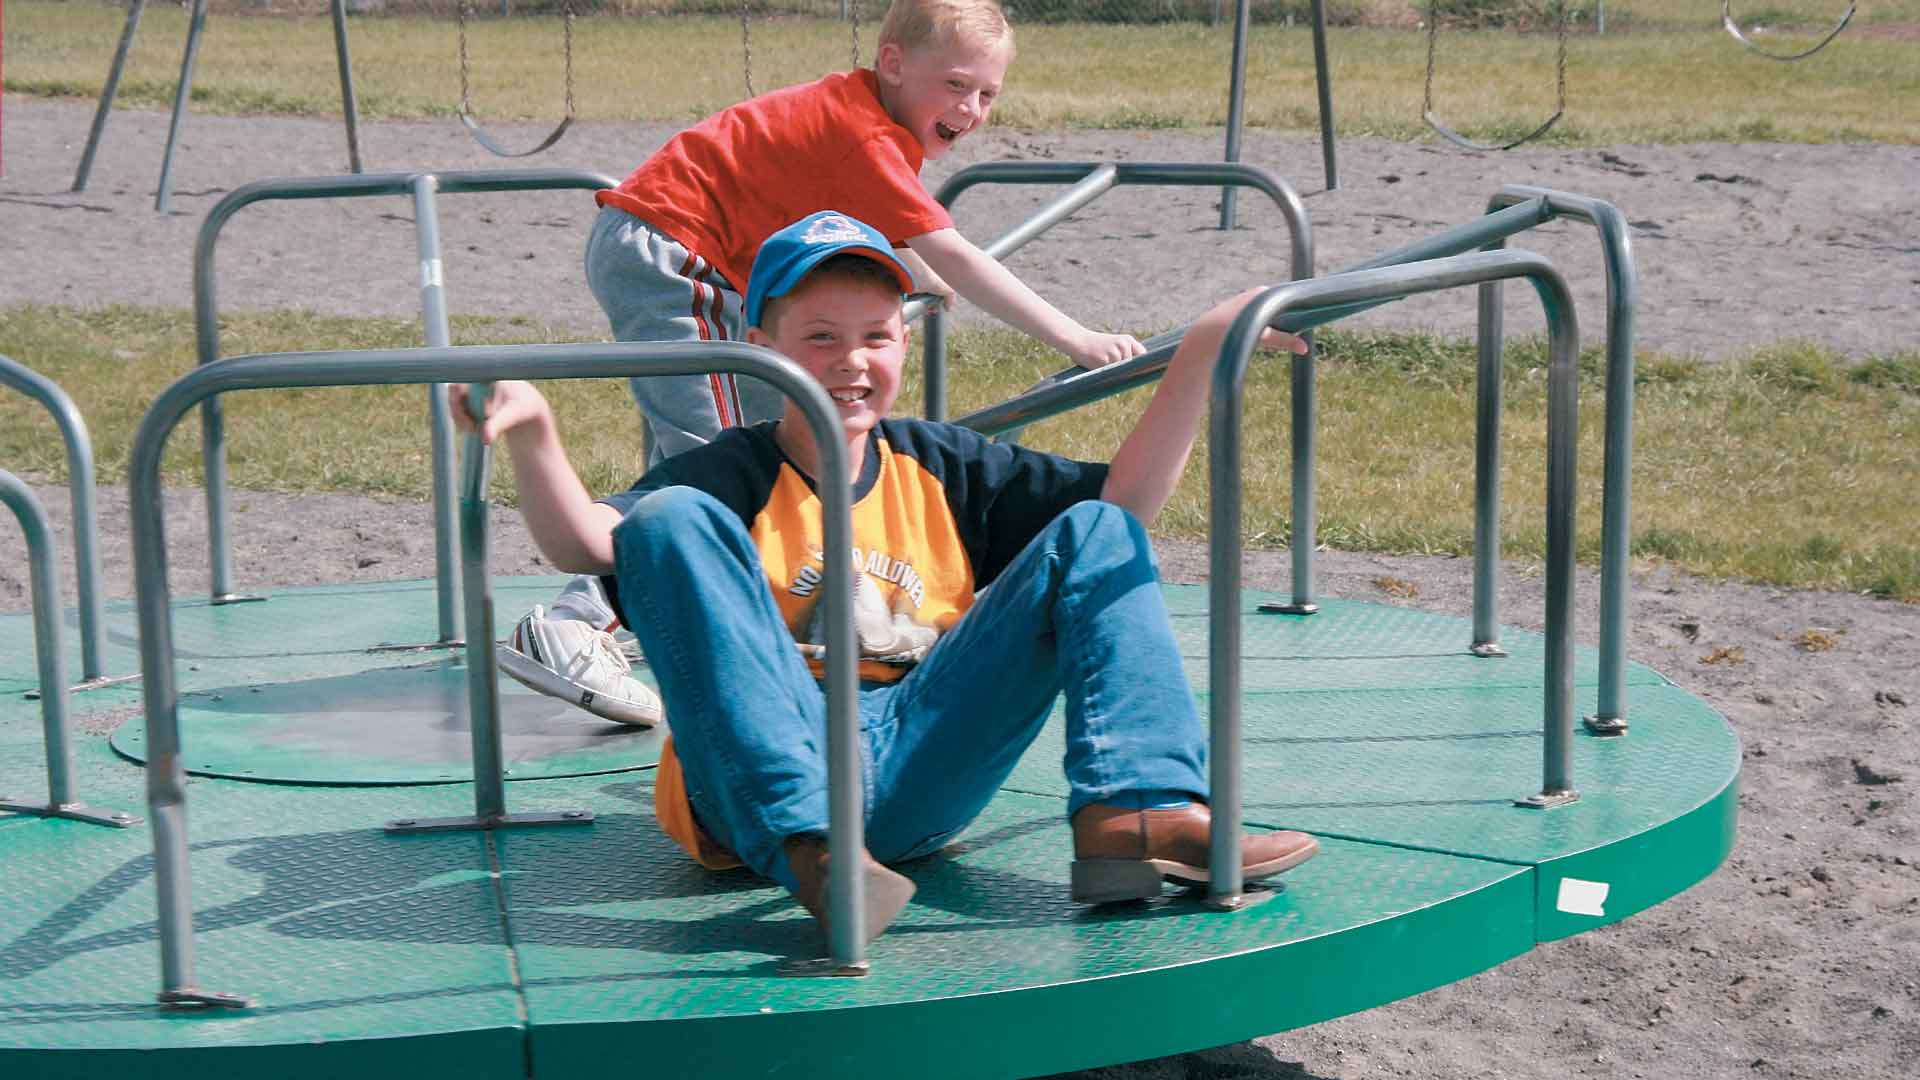 Playground Rules: Have We Gone too Far?